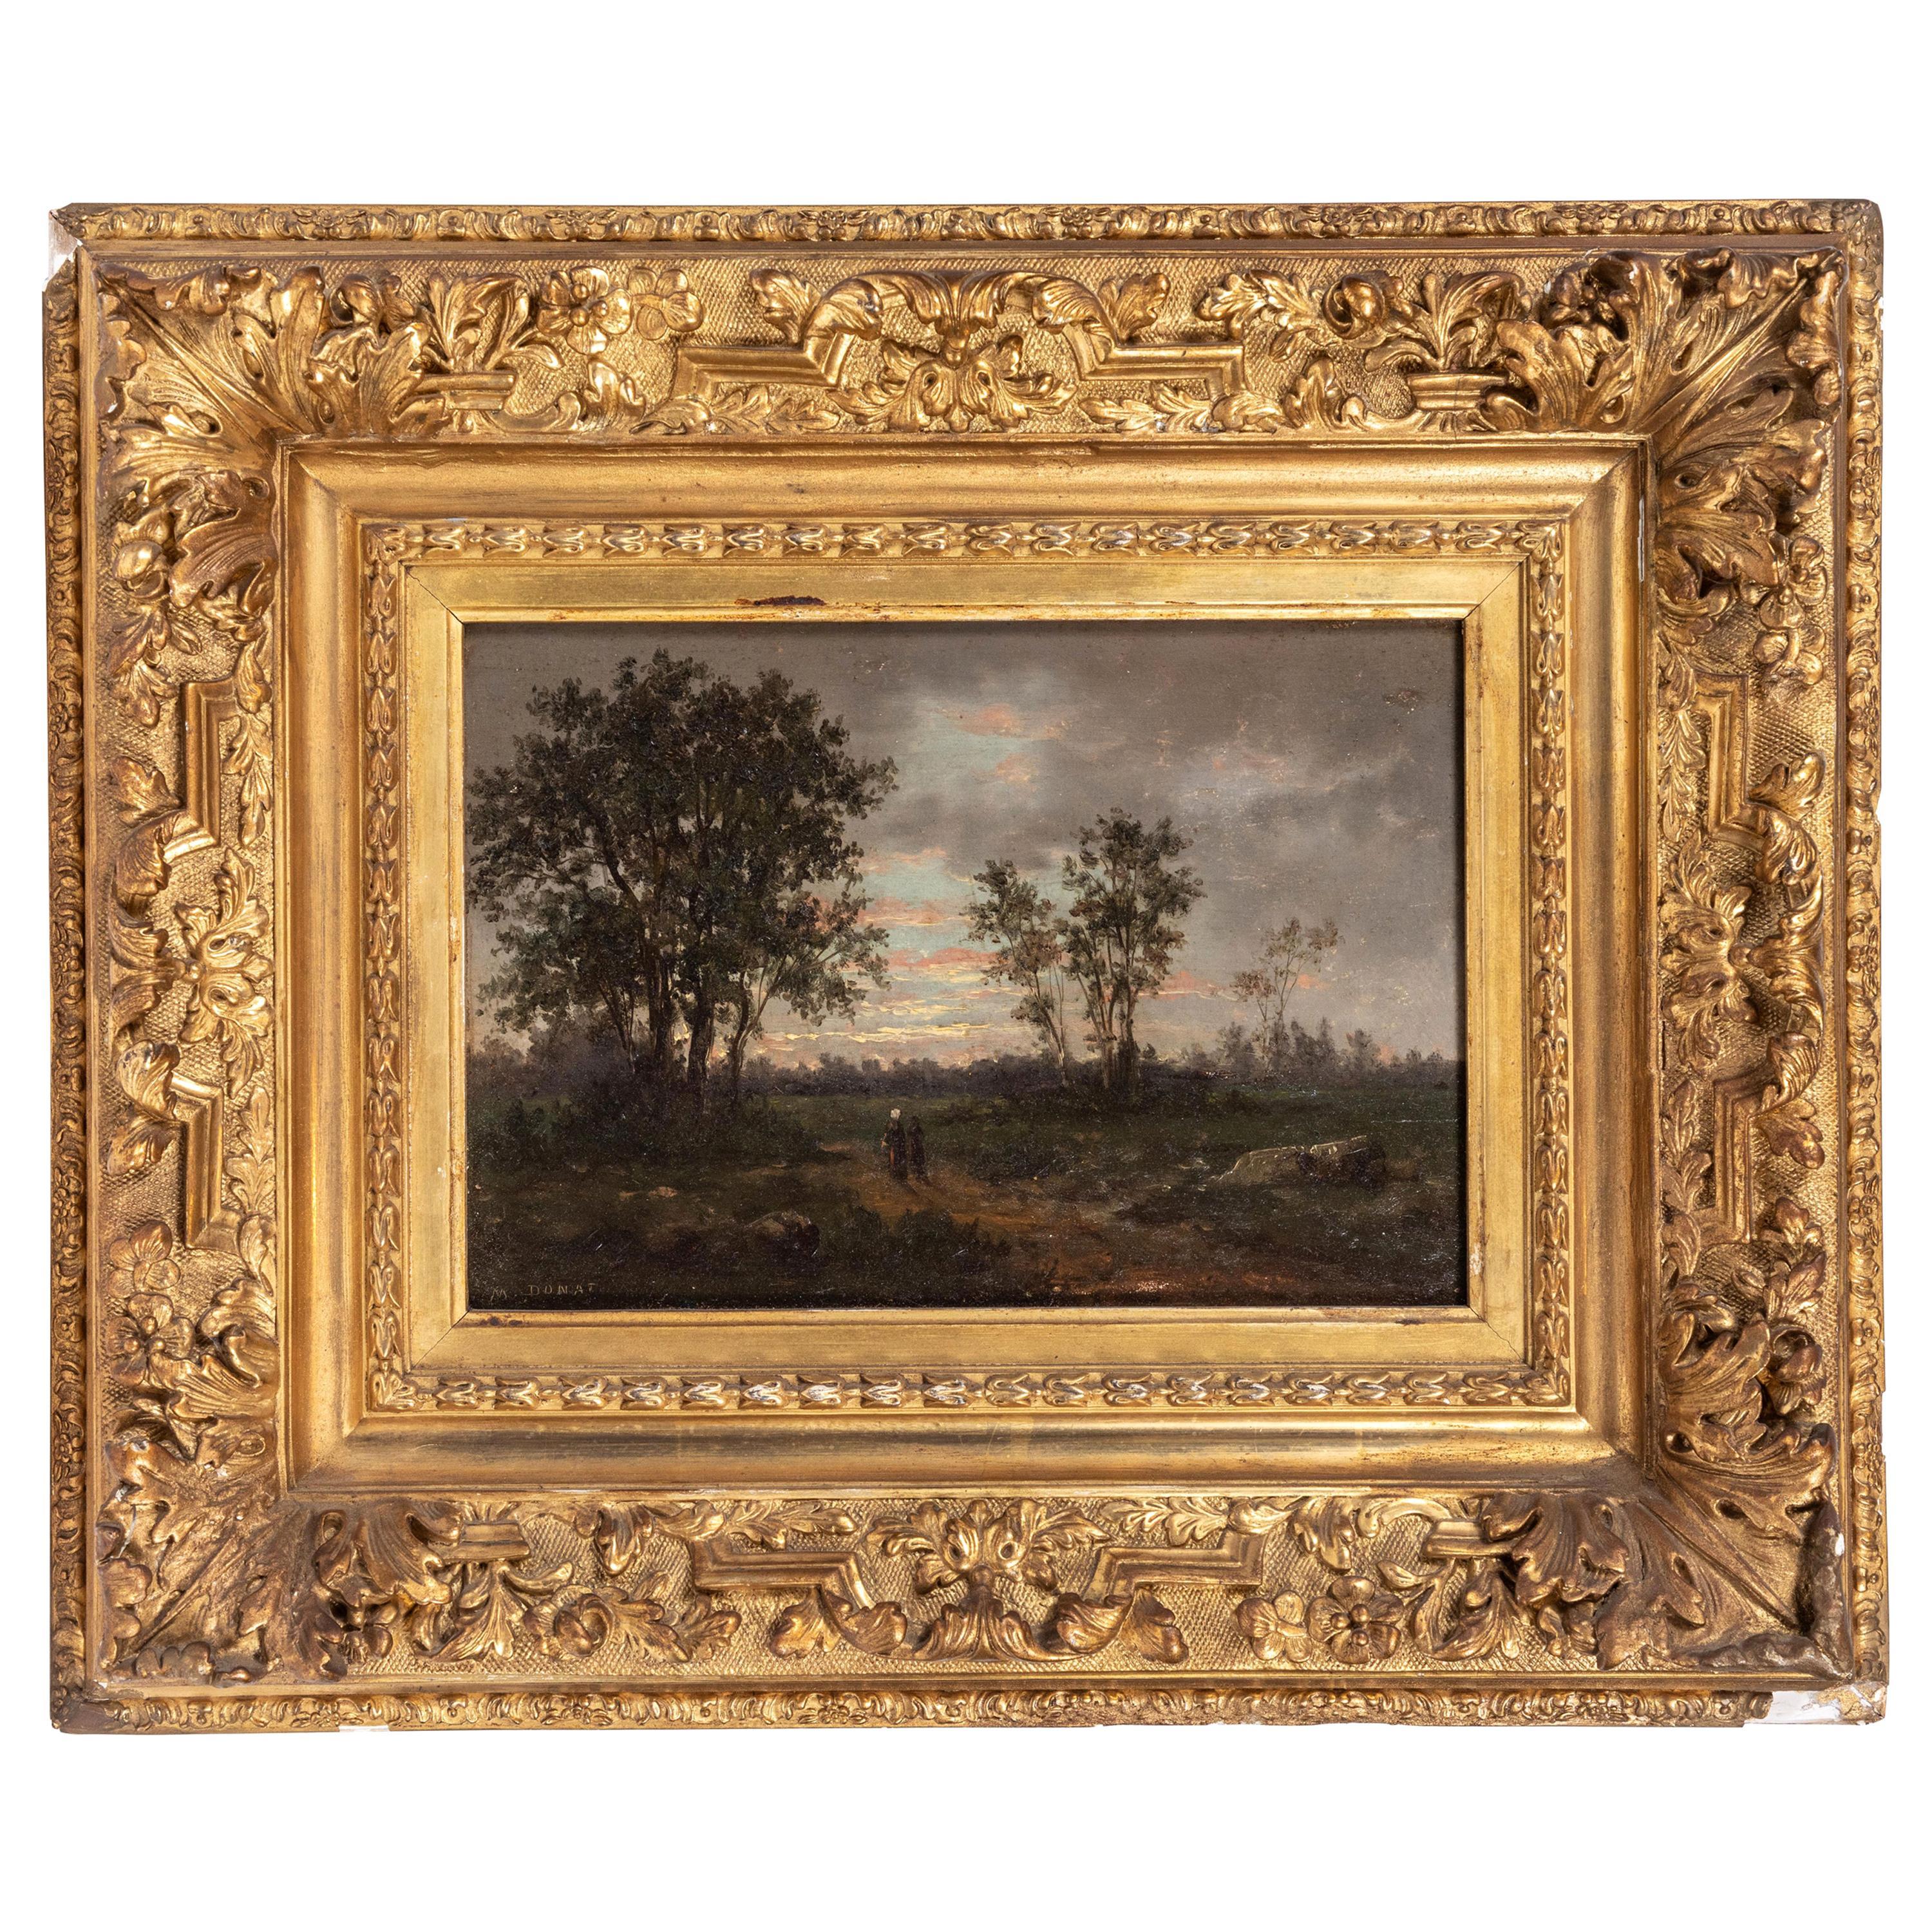 Beautifully rendered, 19th century, oil-on-board, French, Barbizon-school painting of figures in a landscape - signed, “M. Donat”, lower left, and inscribed by the artist on the reverse. Held in a richly hand carved, gessoed, and gilded frame.